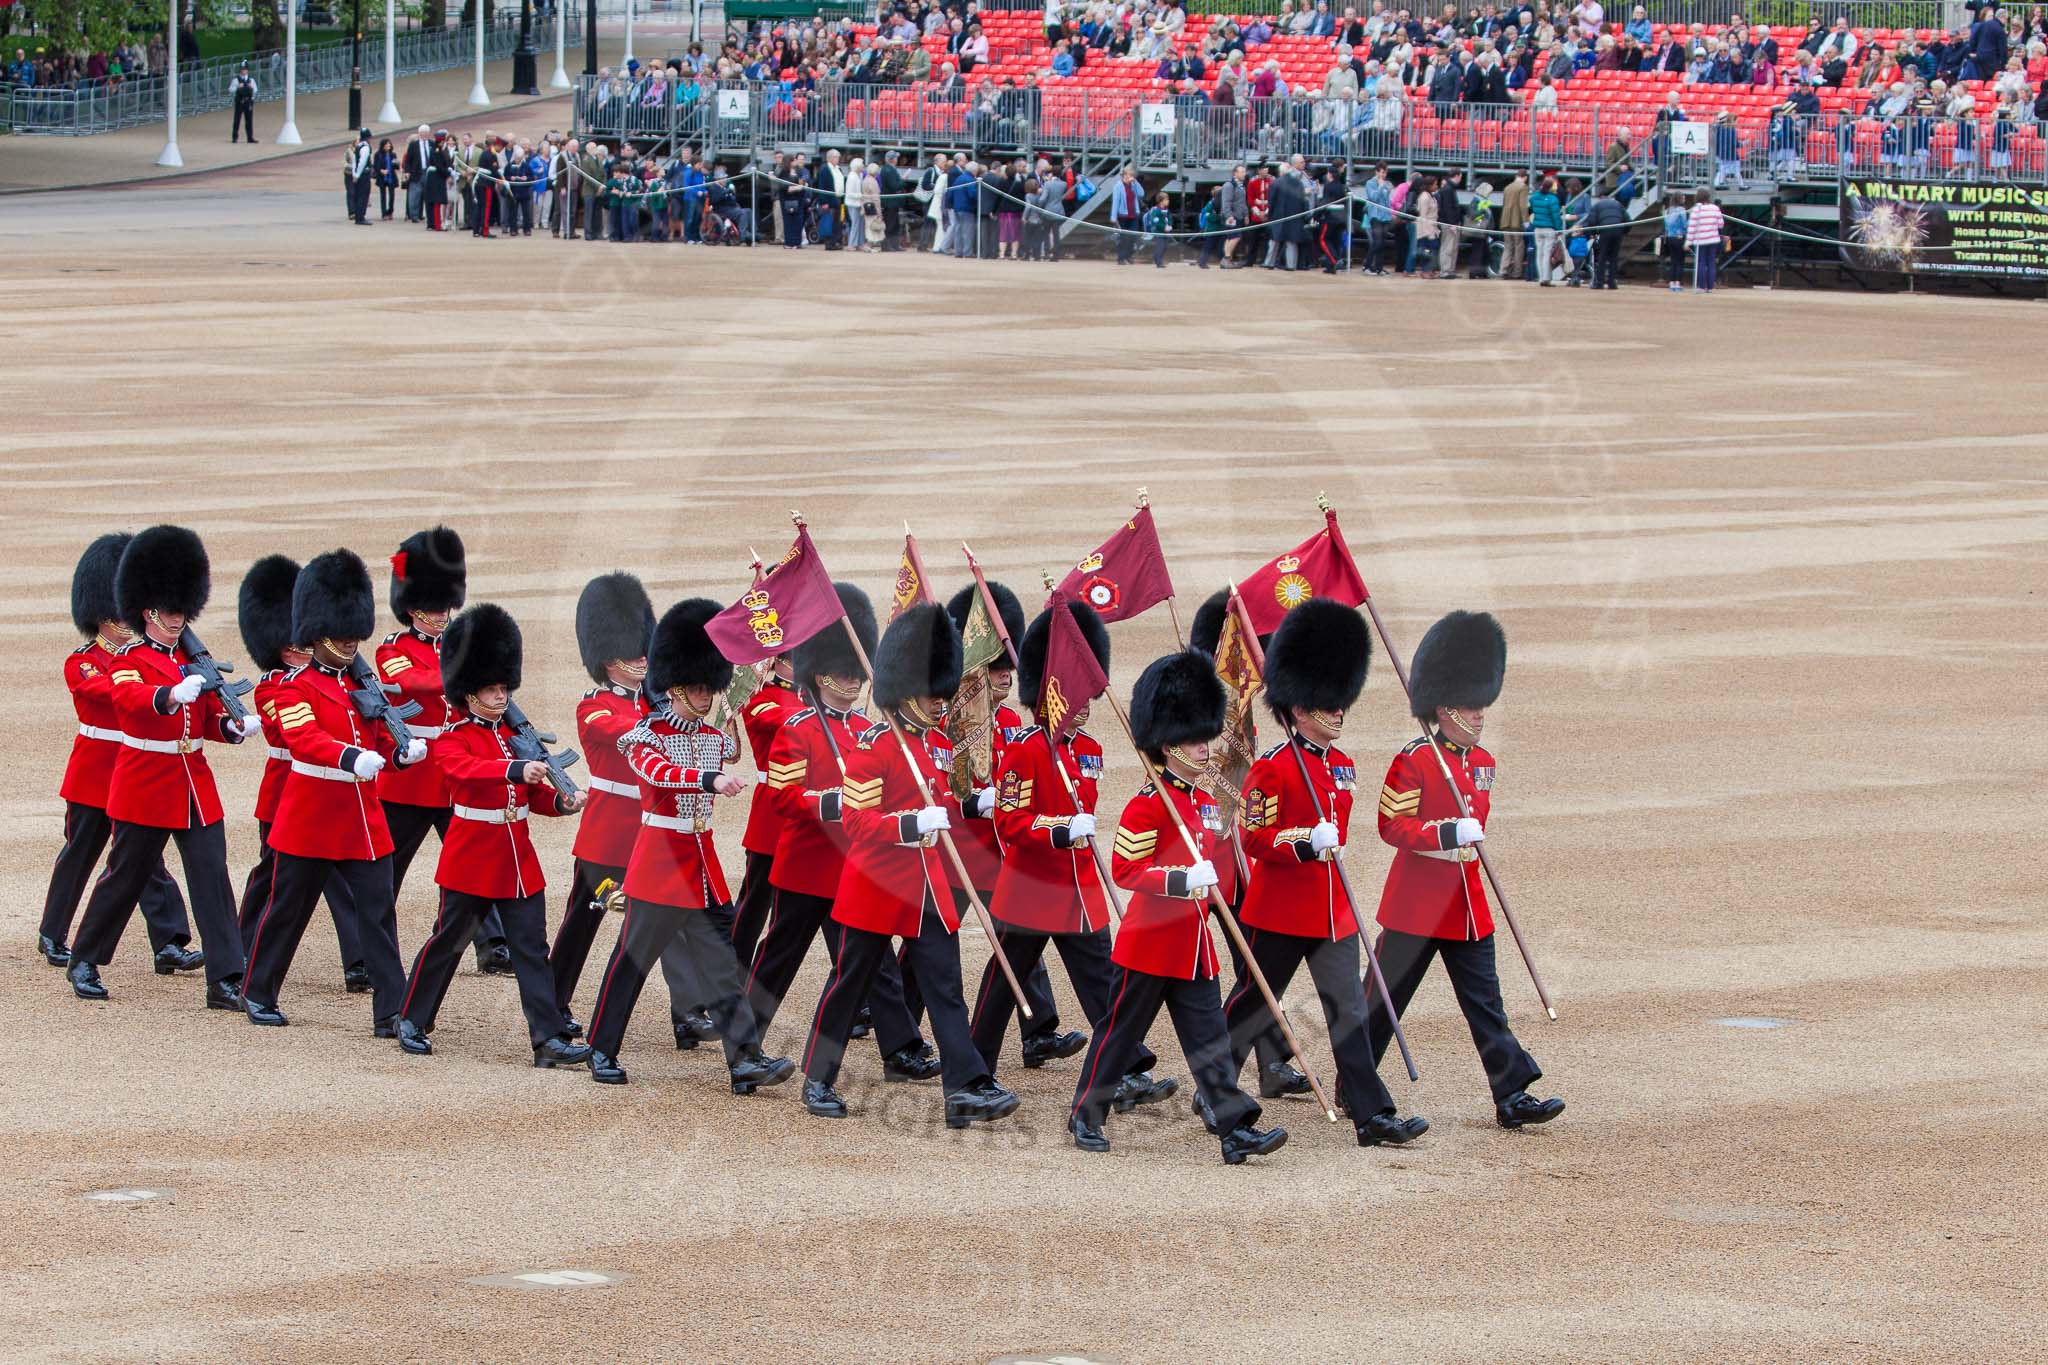 Major General's Review 2013: The 'Keepers of the Ground', guardsmen bearing marker flags for their respective regiments,march on to Horse Guards Parade..
Horse Guards Parade, Westminster,
London SW1,

United Kingdom,
on 01 June 2013 at 09:54, image #21